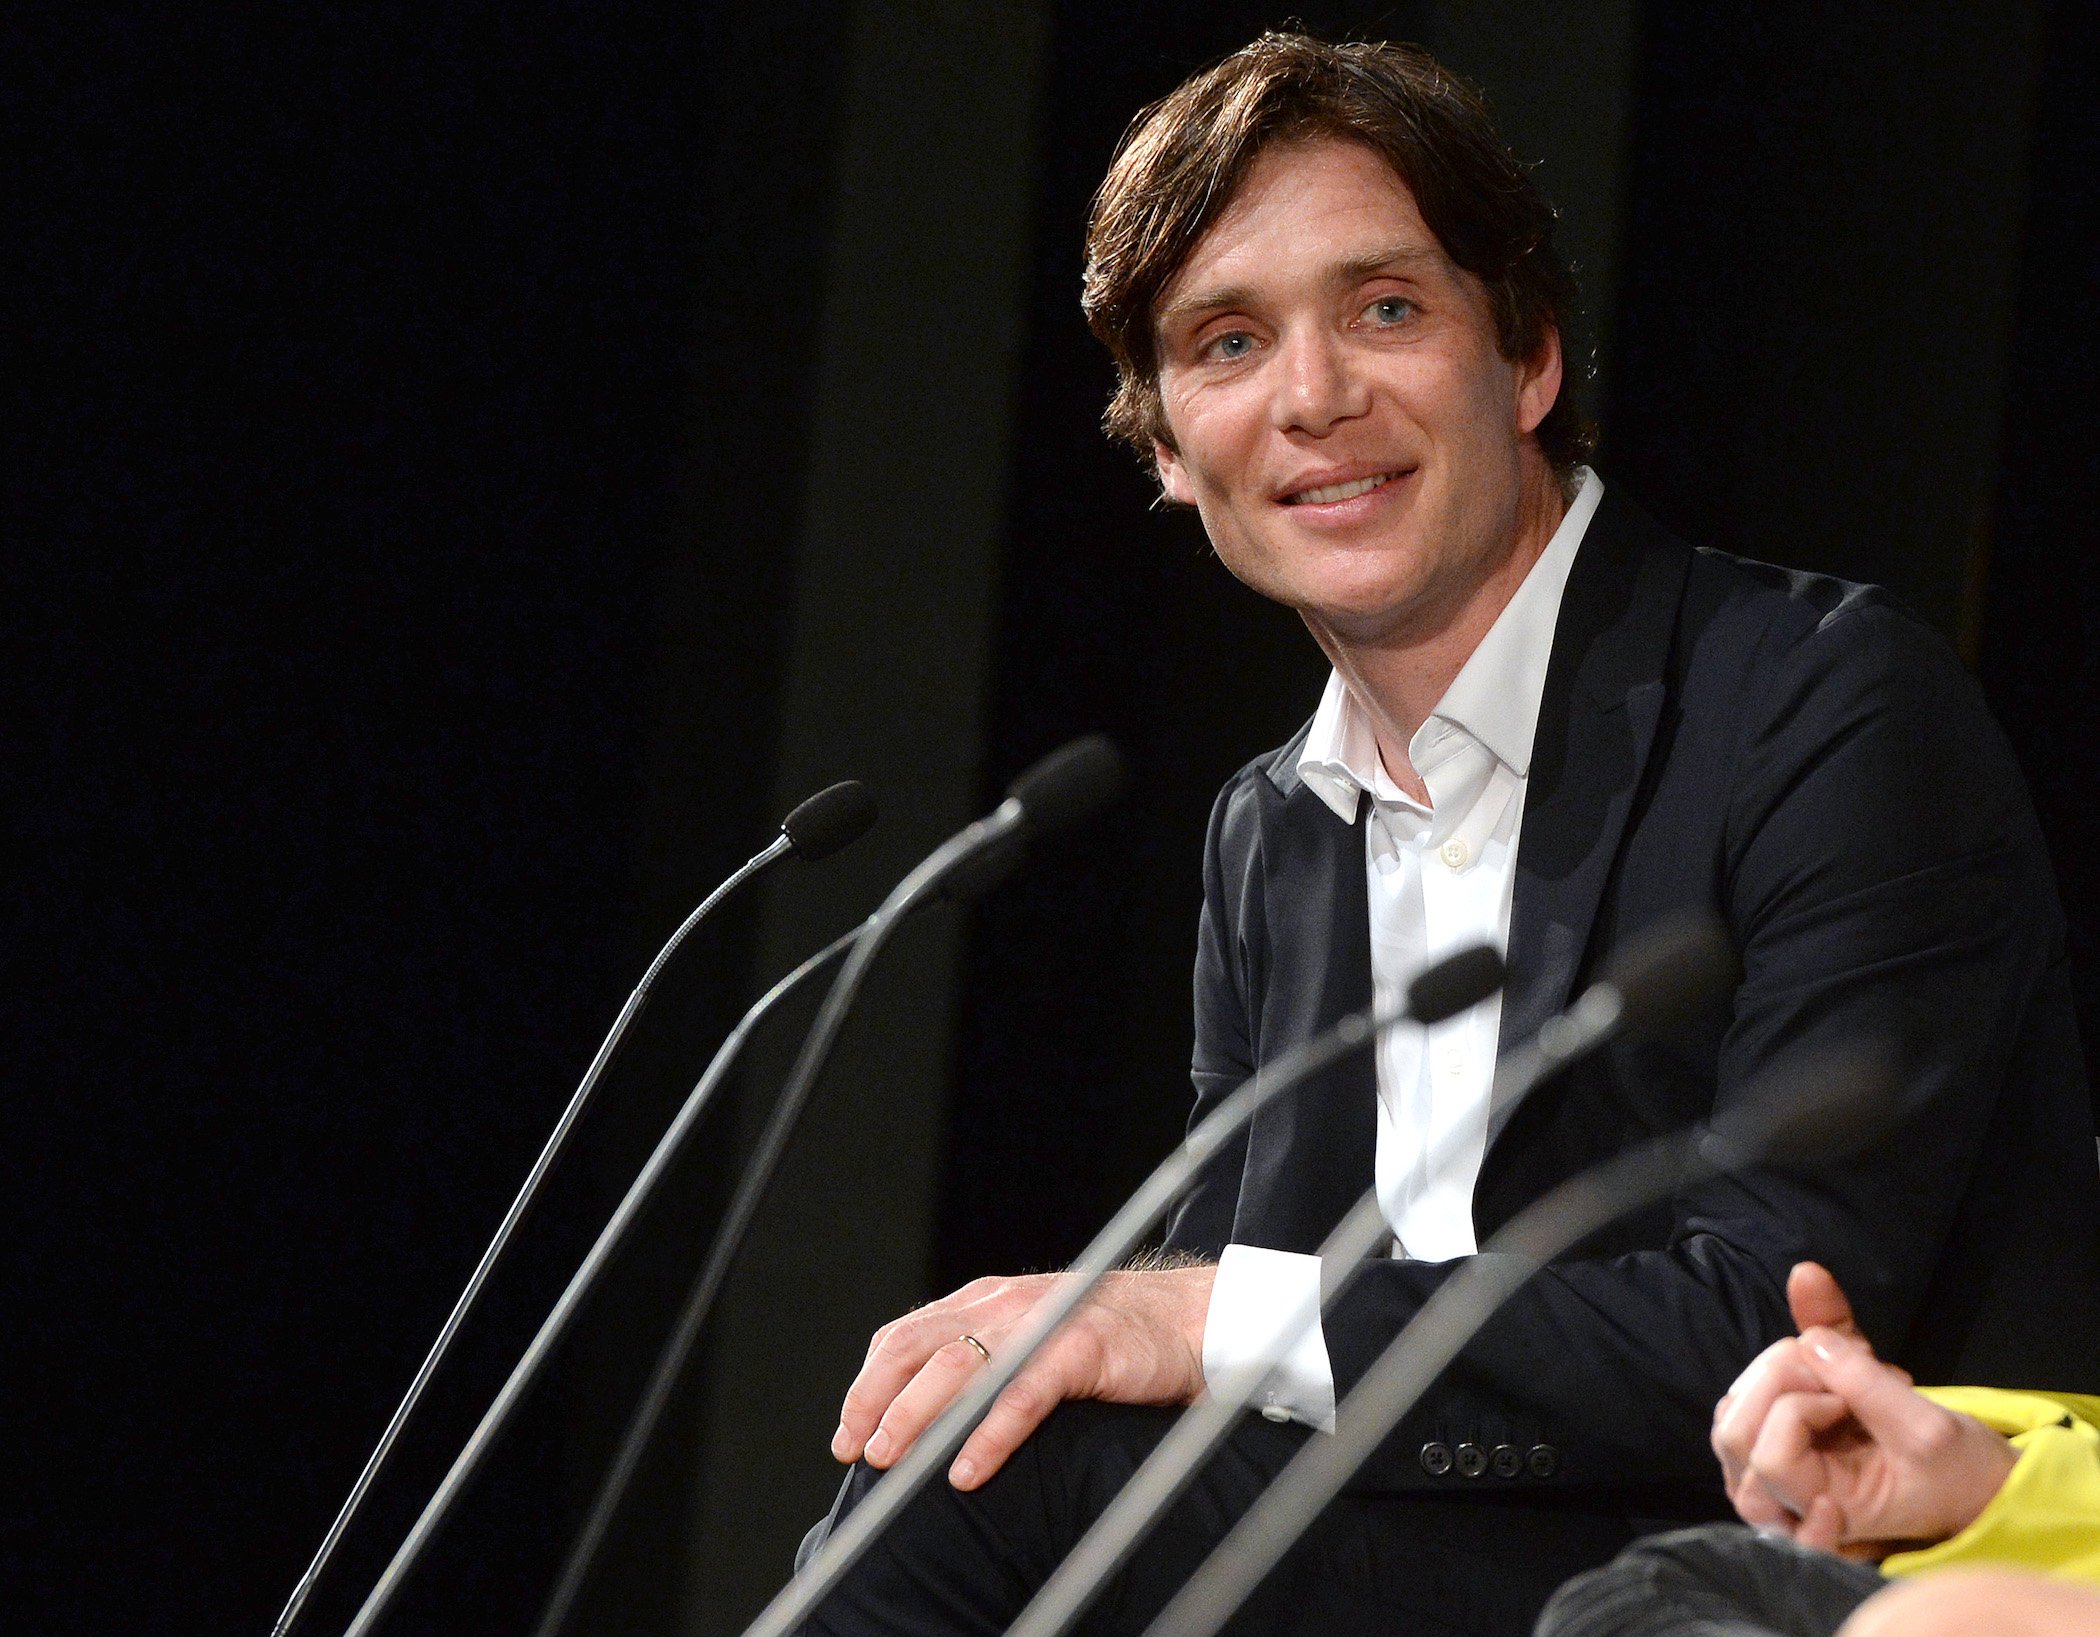 Cillian Murphy from 'Peaky Blinders' Season 6 smiling and leaning toward a microphone at a Q&A